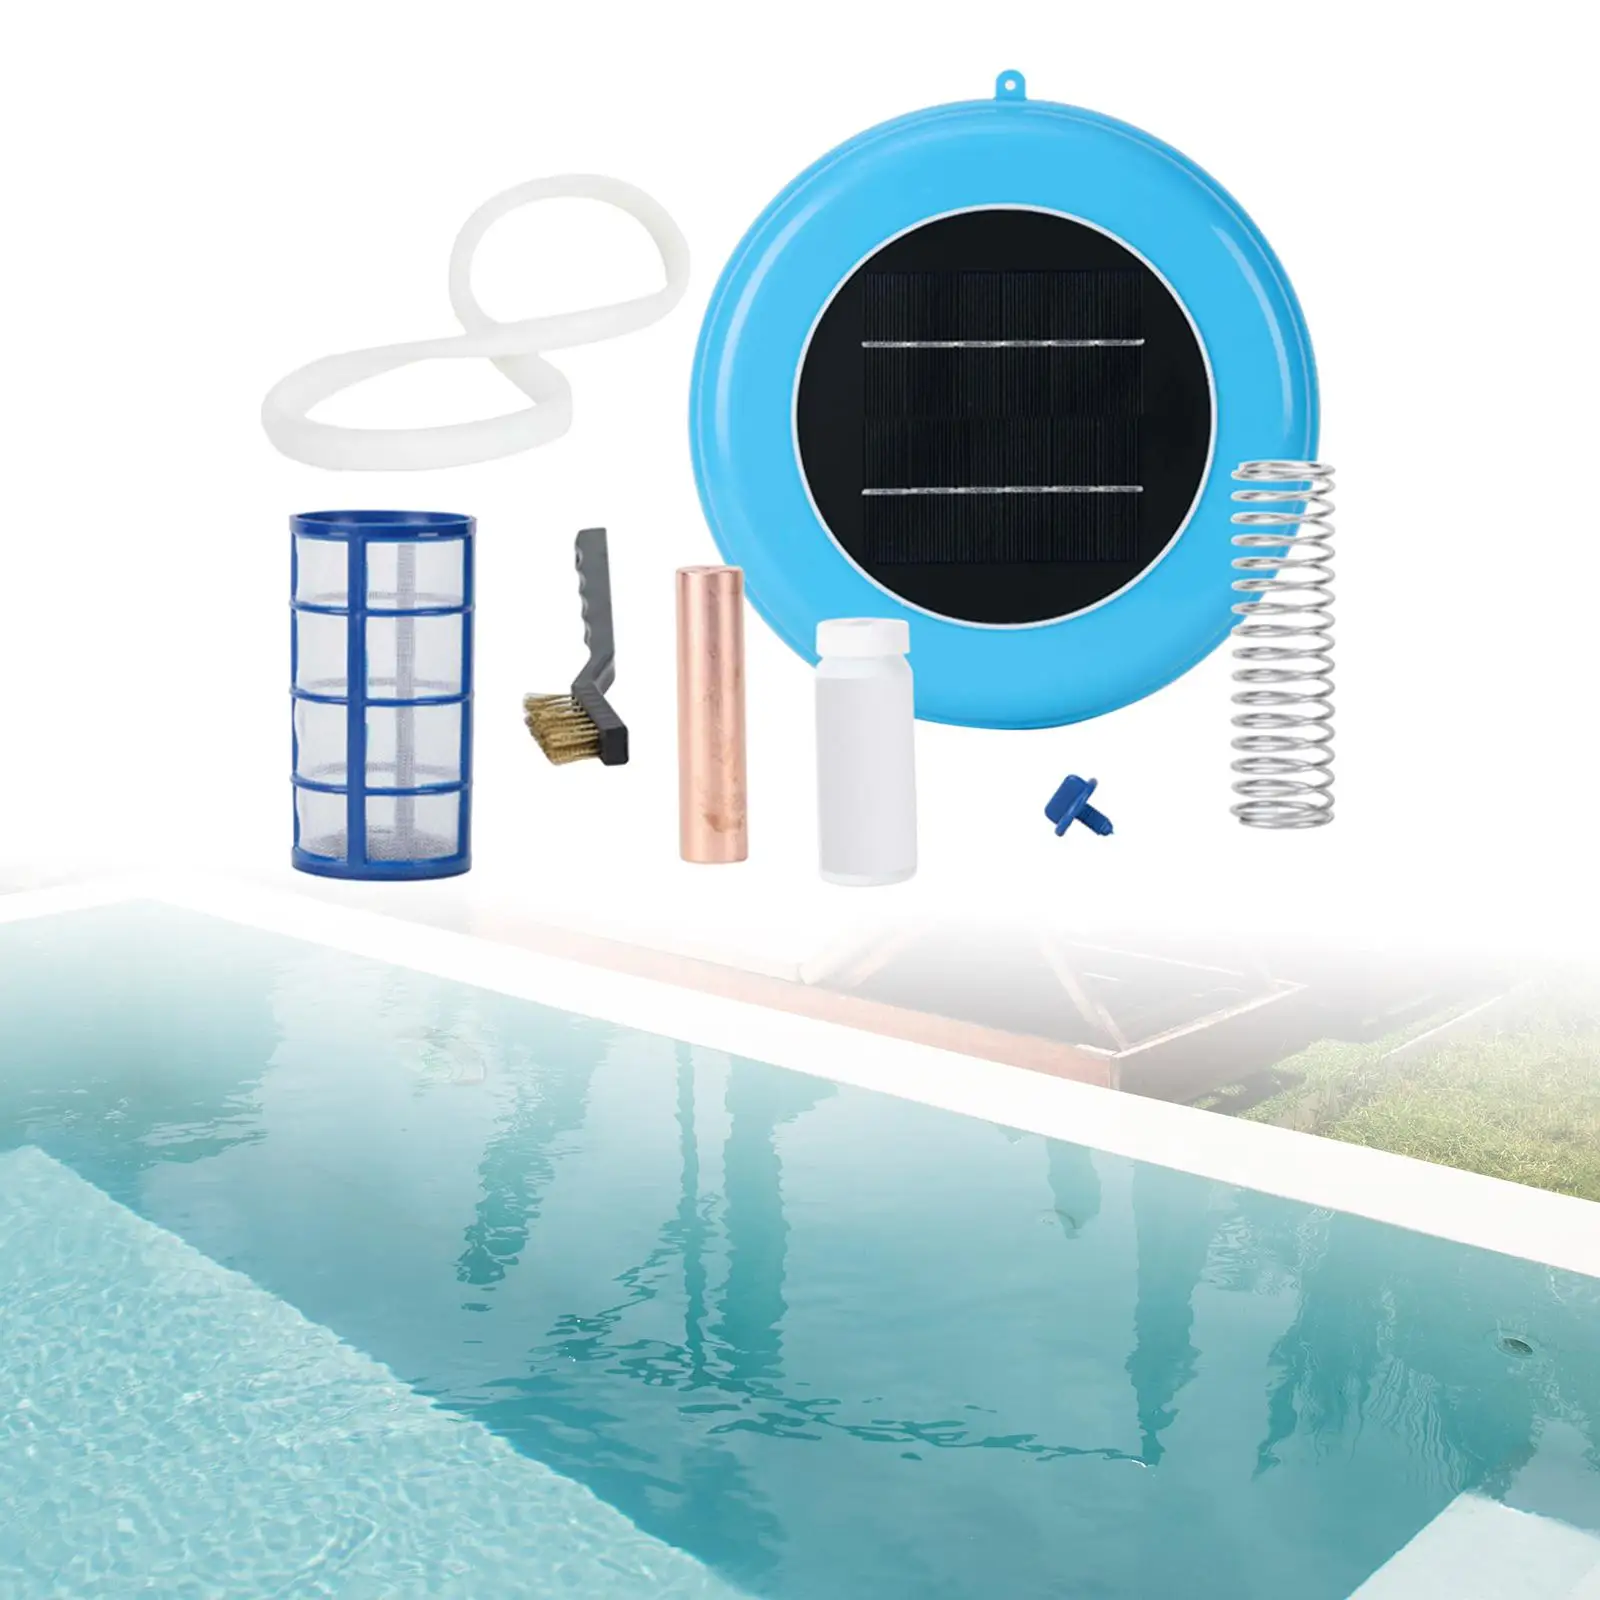 

Solar Powered Pool Ionizer Reduces Chlorine Durable Water Purifier Copper Silver Ion Pool Clarifier for Hot Tub Swimming Pool